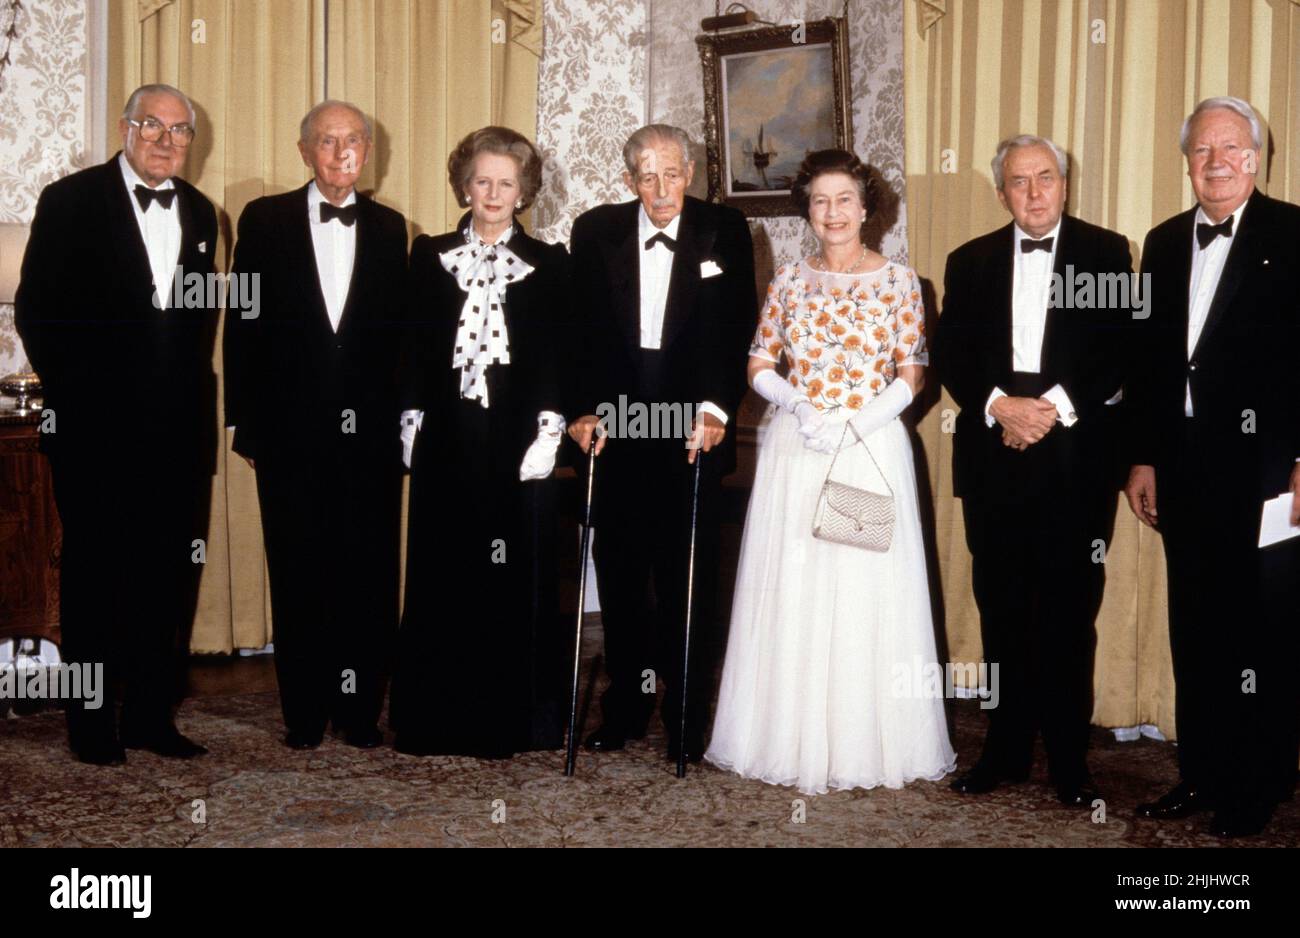 File photo dated 4/12/1985 of Margaret Thatcher joined by Queen Elizabeth II and five former PMs at 10 Downing Street, London, as the PM hosted a dinner celebrating the 250th anniversary of the residence becoming the London home of Prime Ministers. (L-R) James Callaghan, Lord Home, Harold Macmillan, MargaretThatcher, Lord Stockton, the Queen, Lord Wilson and Edward Heath. Issue date: Sunday January 30, 2022. Stock Photo